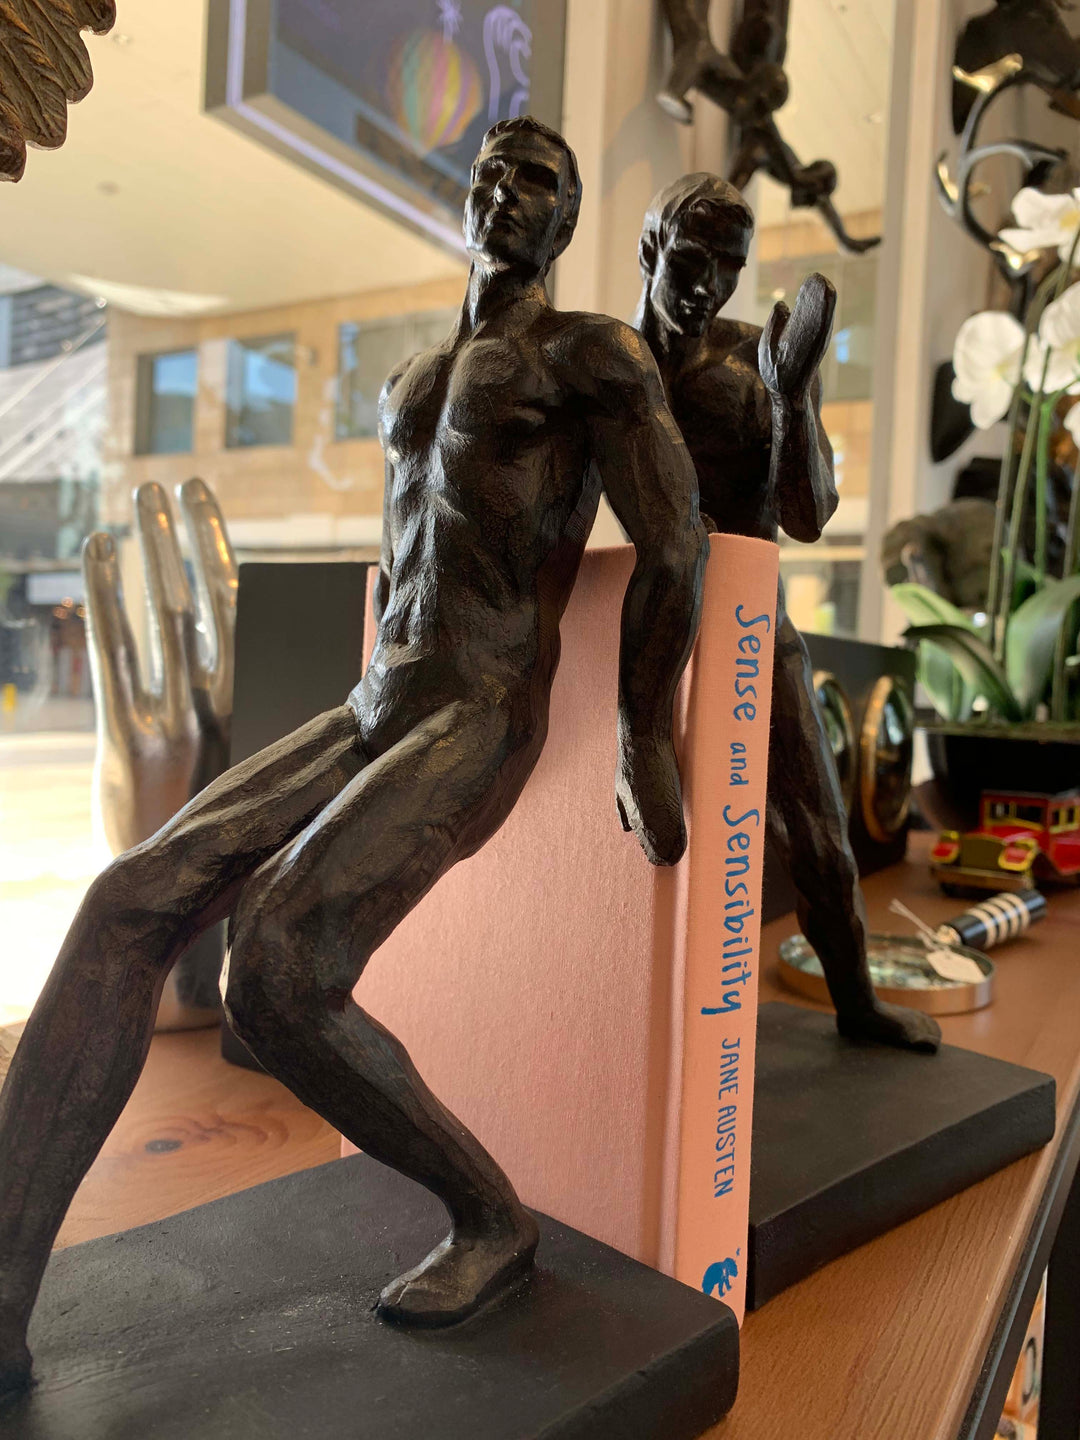 Men pushing Bookend, Push and Pull Men Bookends, 27cm